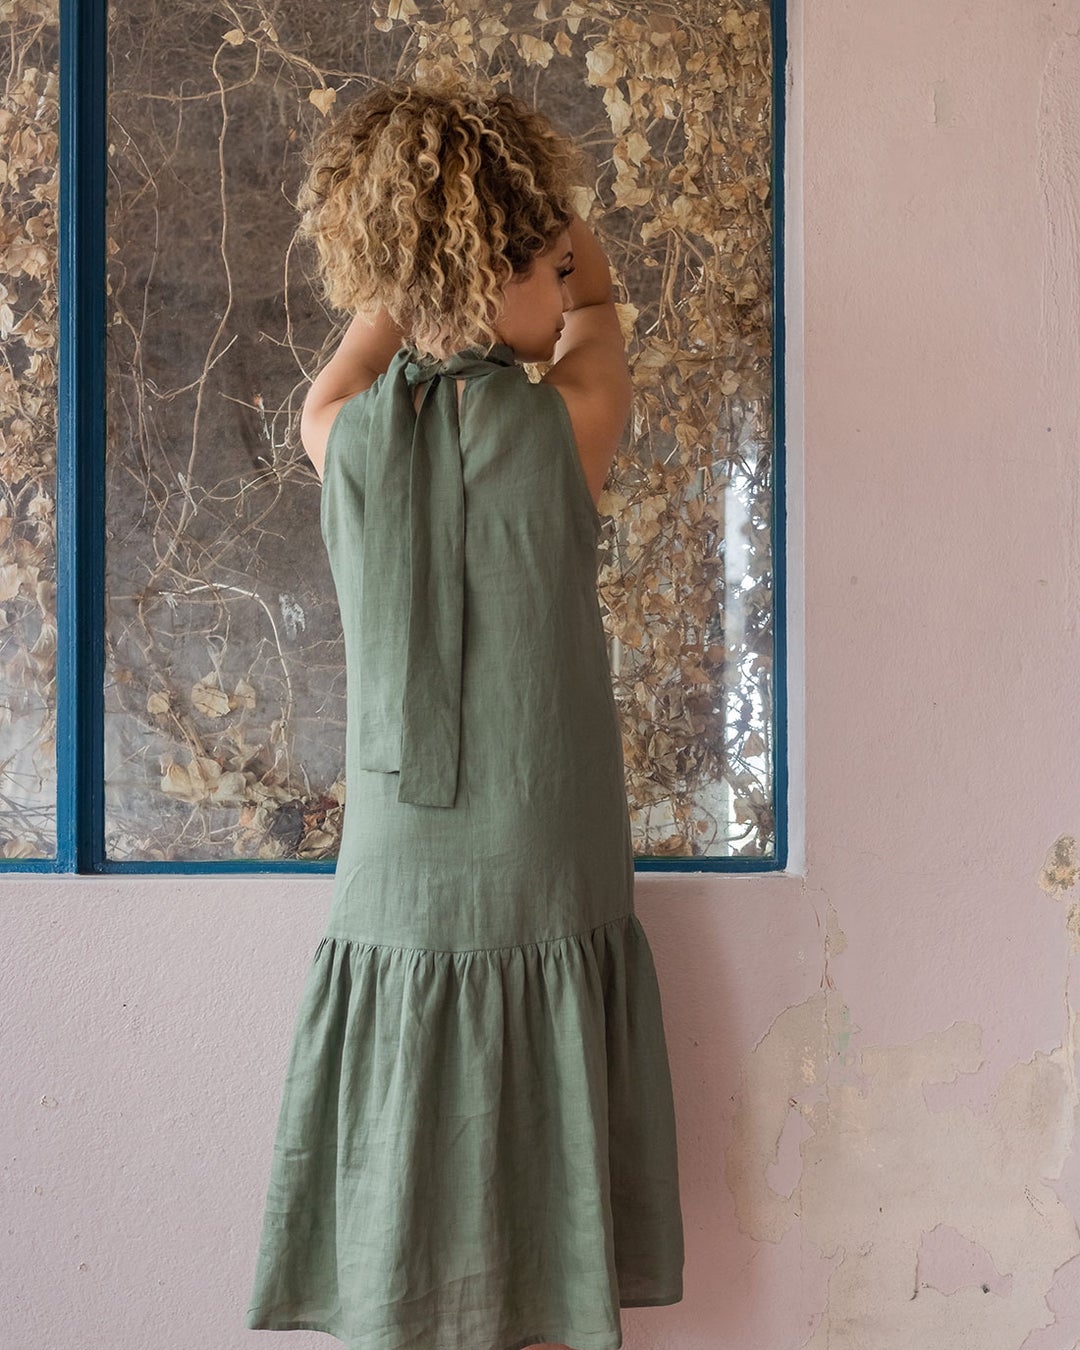 We see a woman’s back, she’s holding her hair up and looking to one side while wearing a green linen dress. 